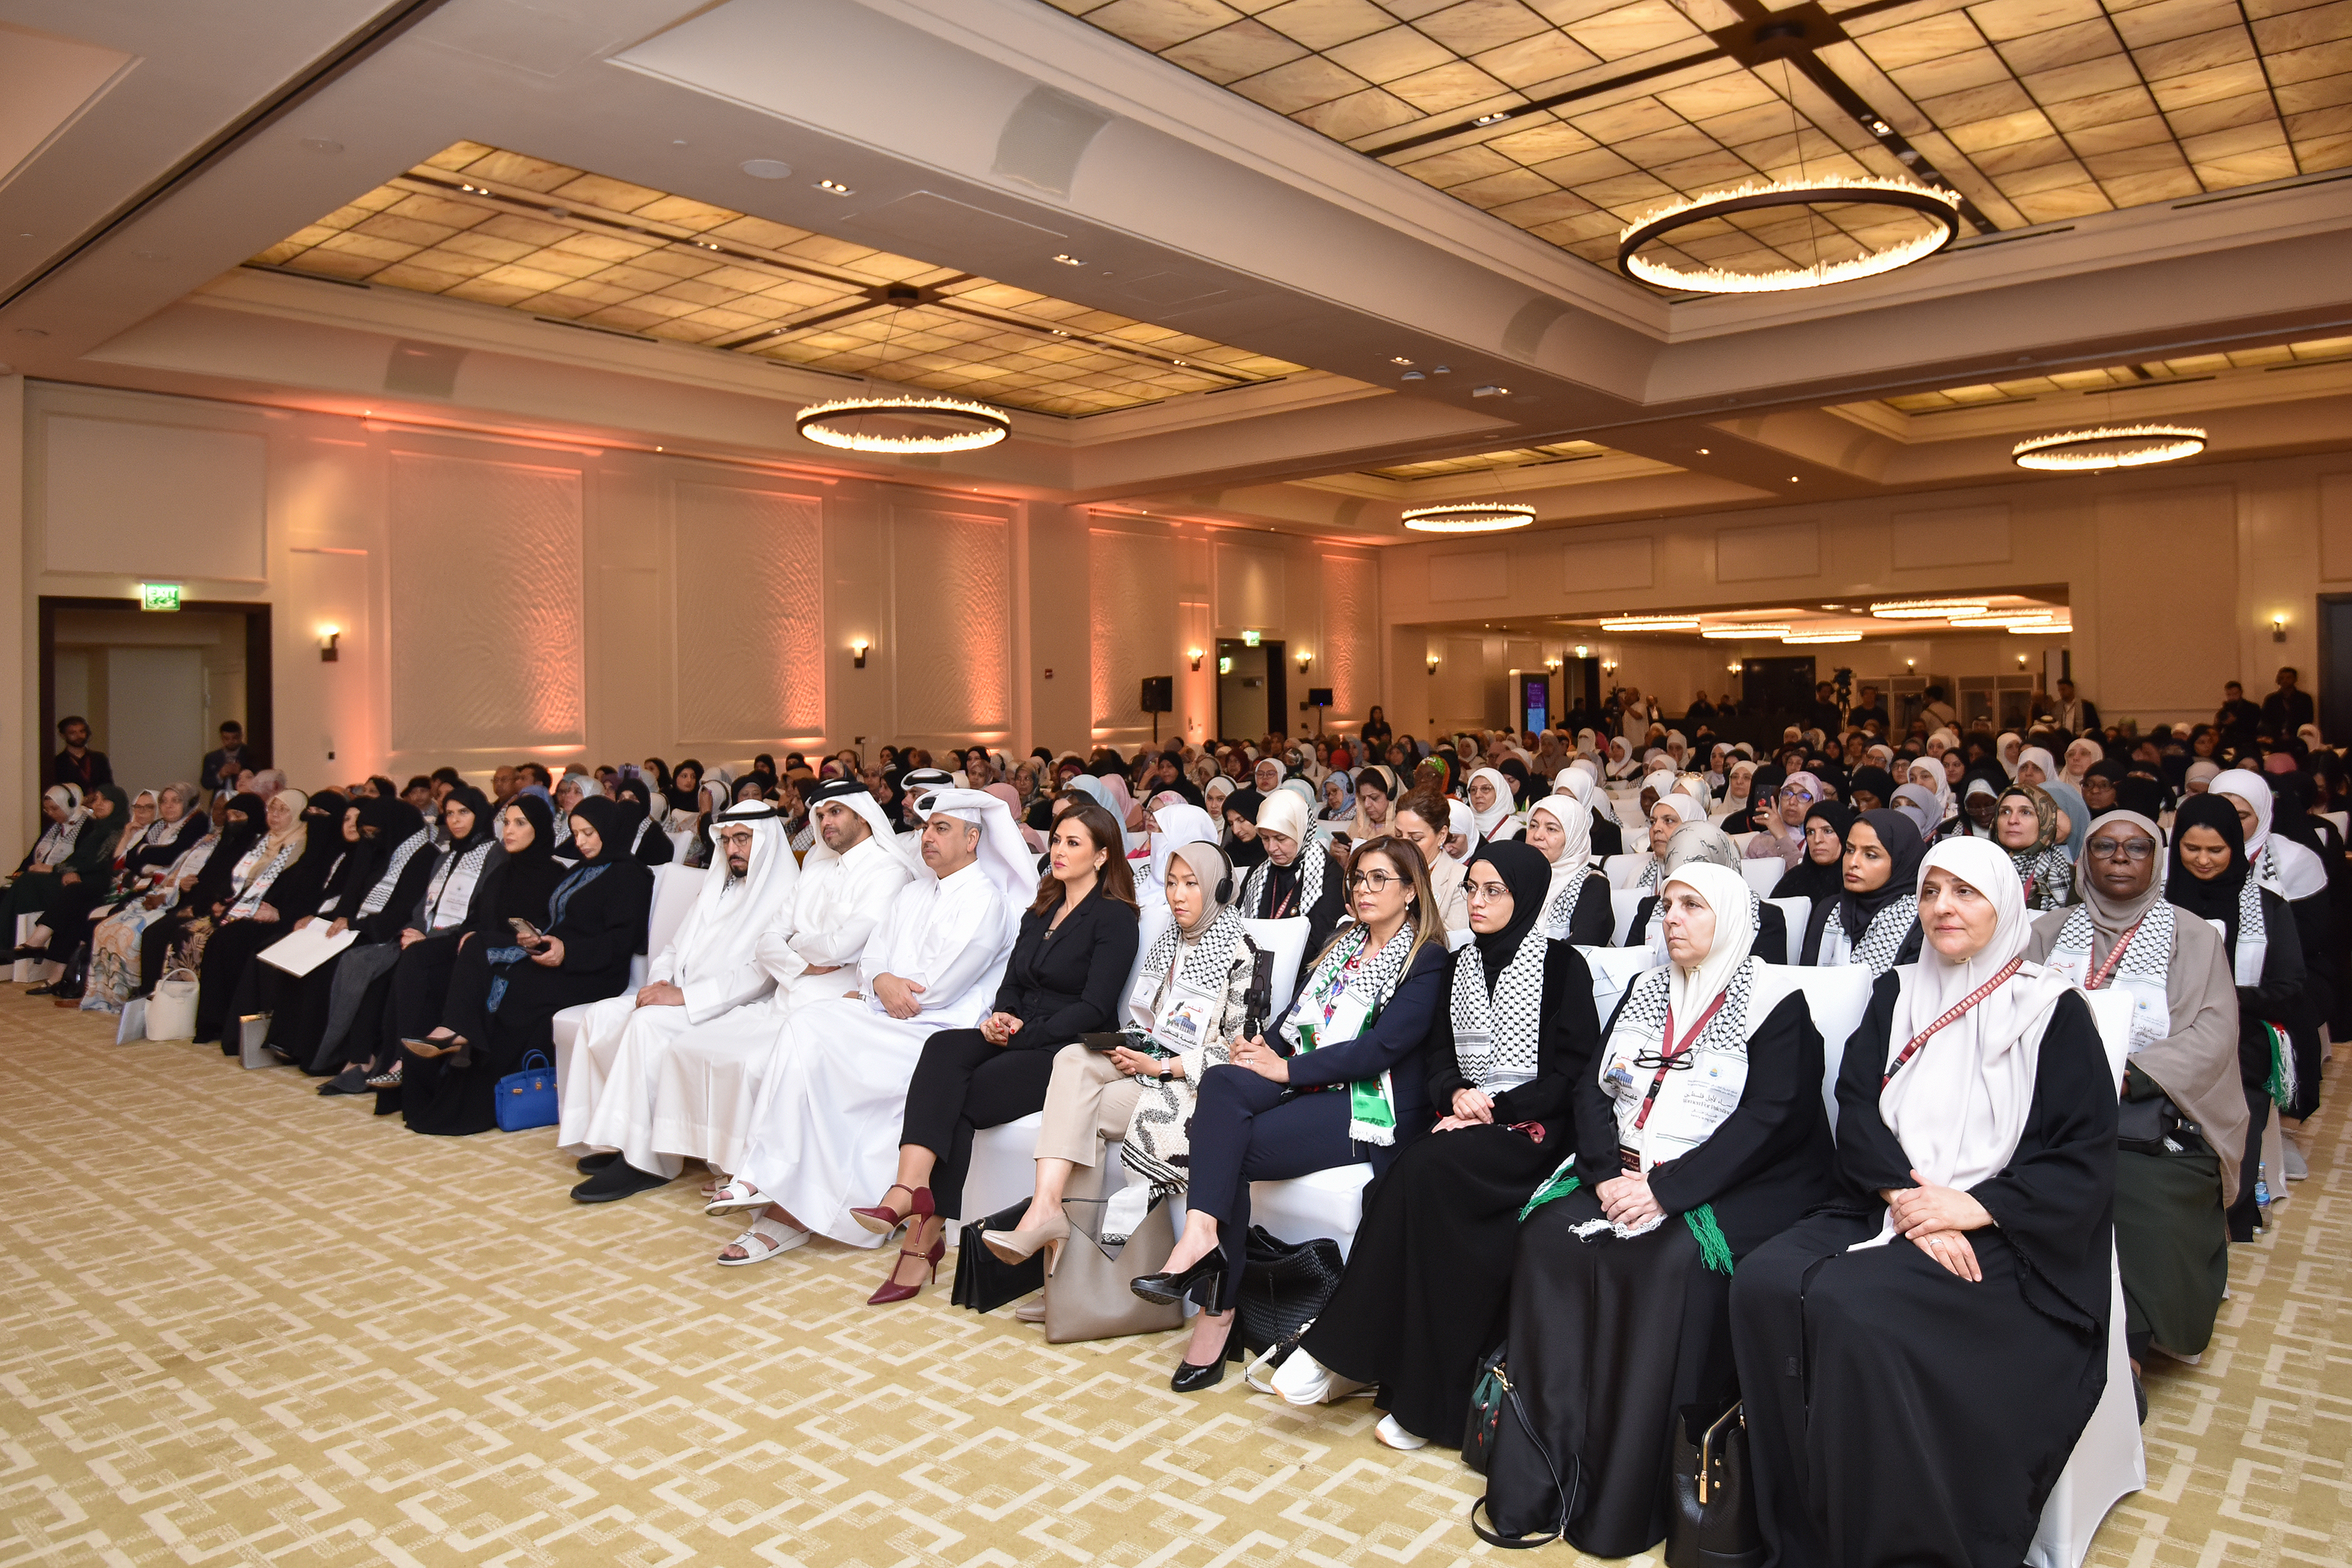 Women's Leadership Conference to Support Palestinian Women and Children “Safety is My Right” Held in Qatar